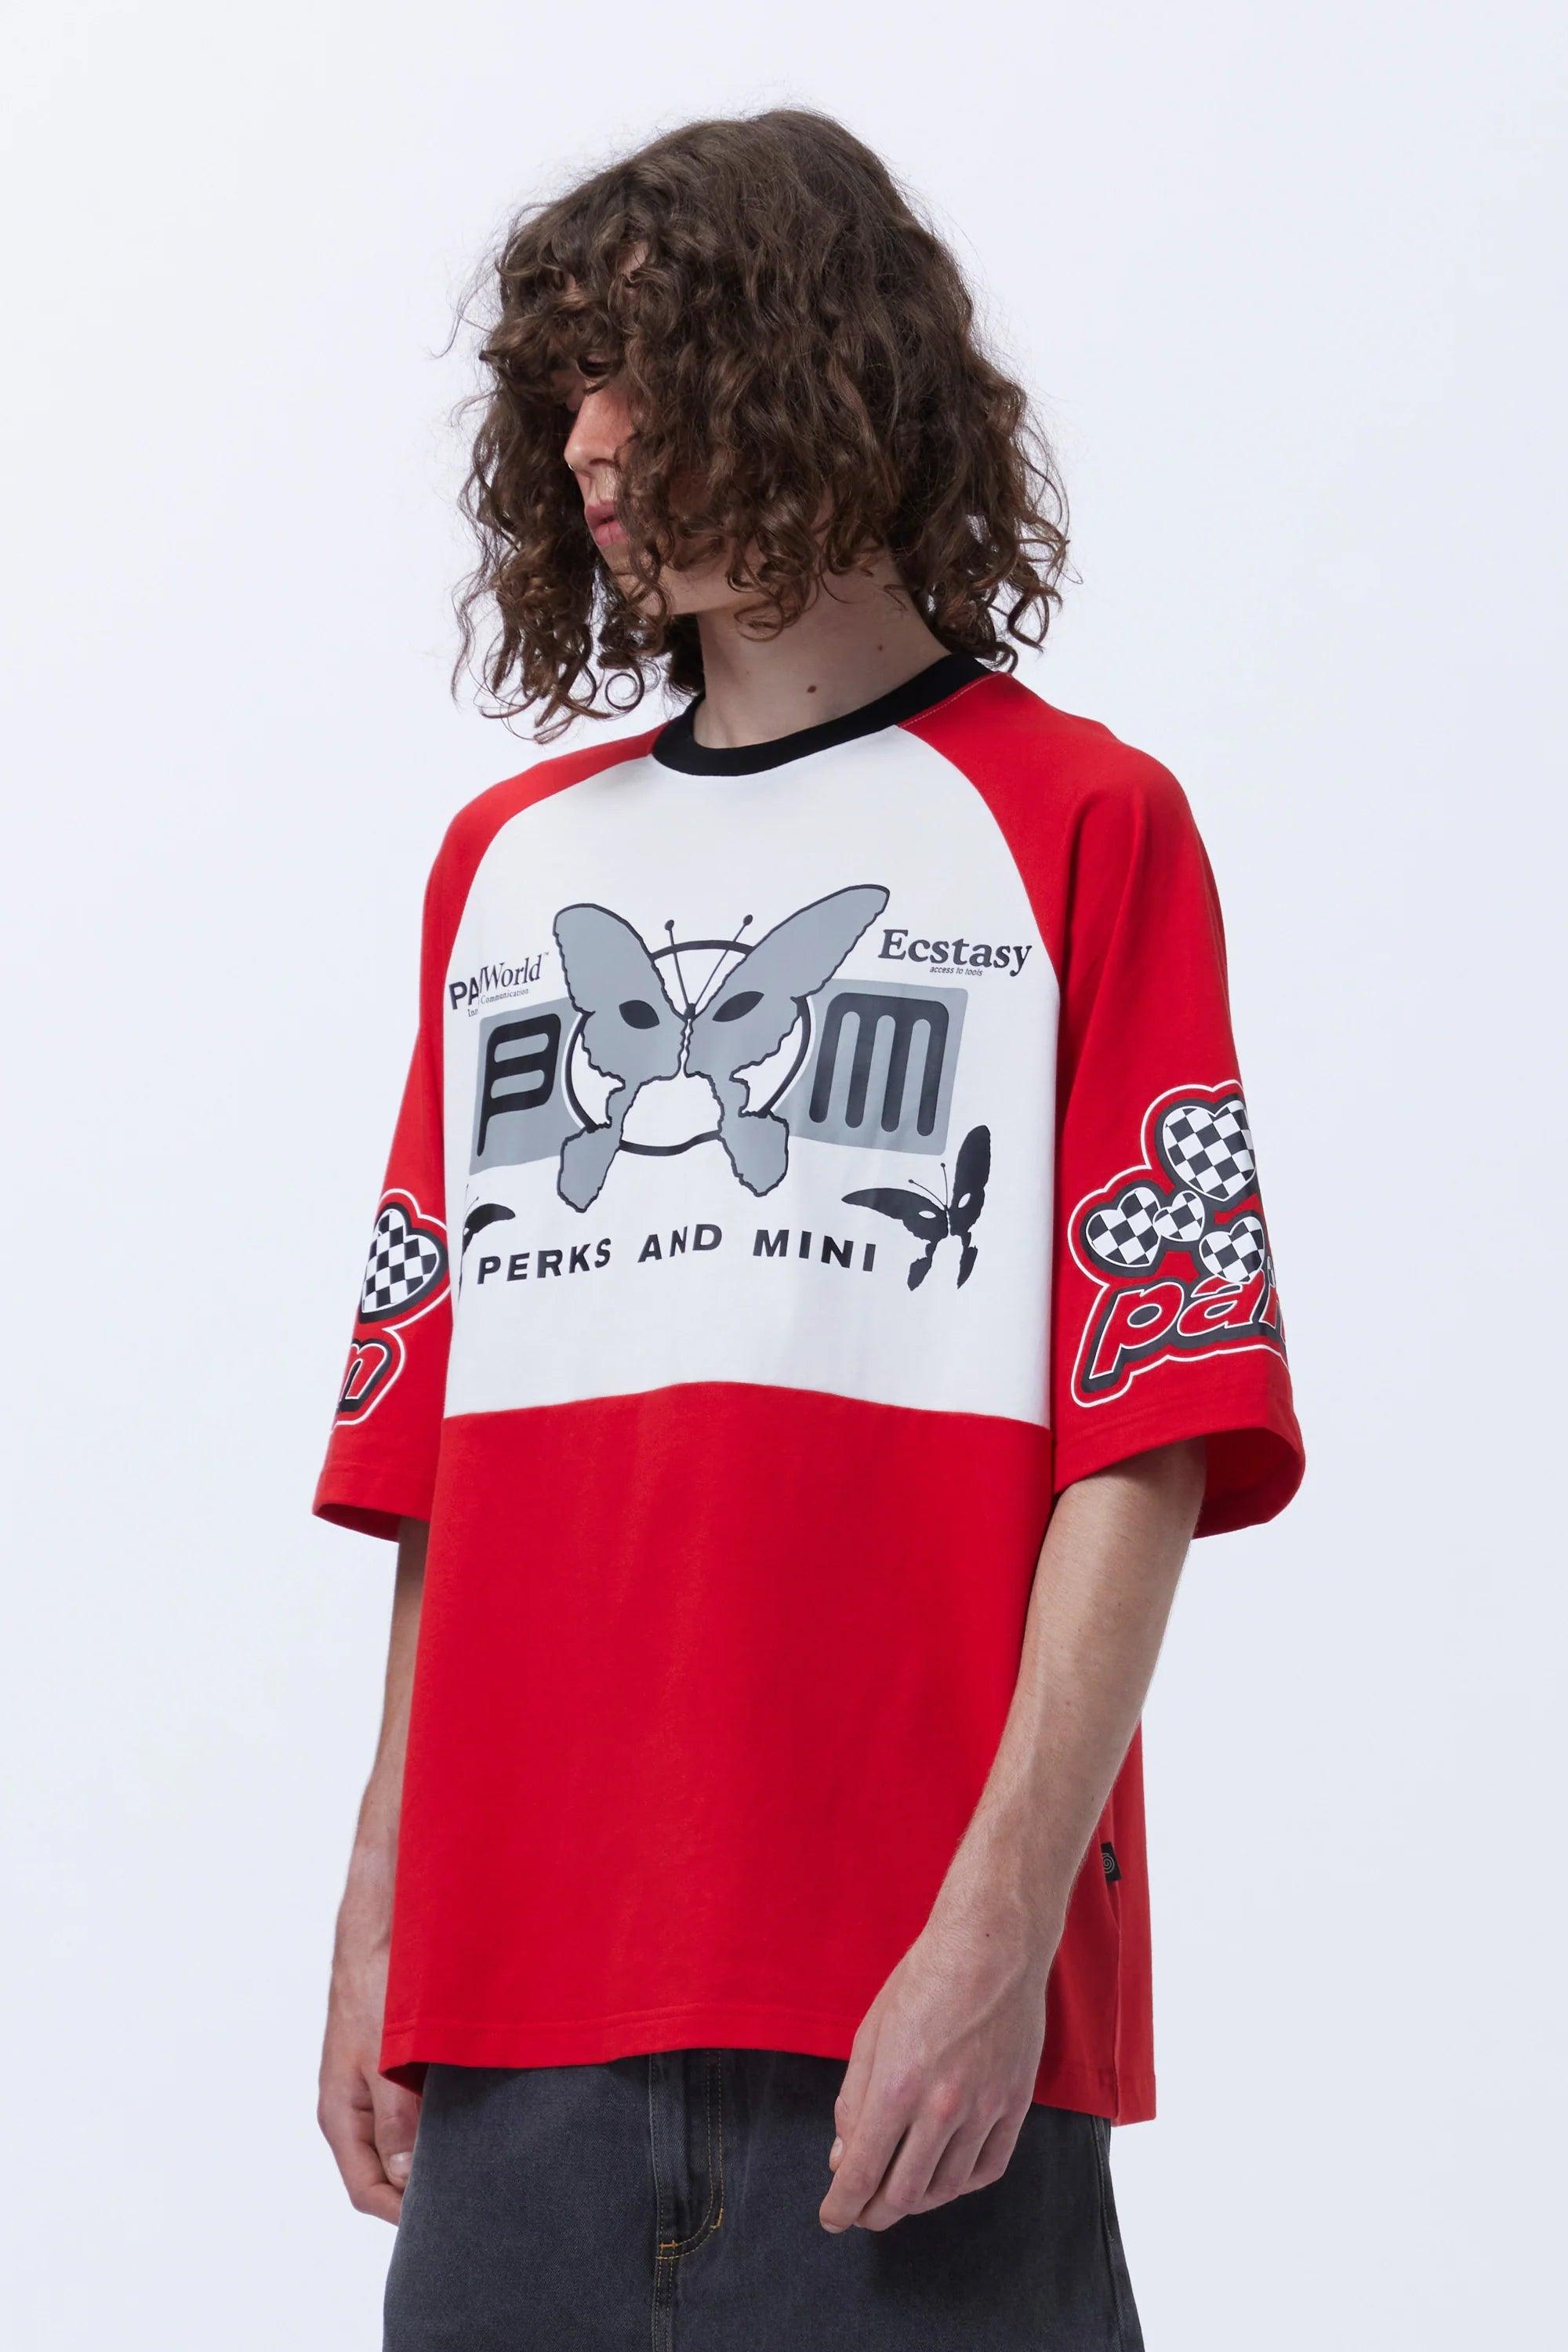 PAM / Perks and Mini - Racer Contrast SS Tee - Multi -